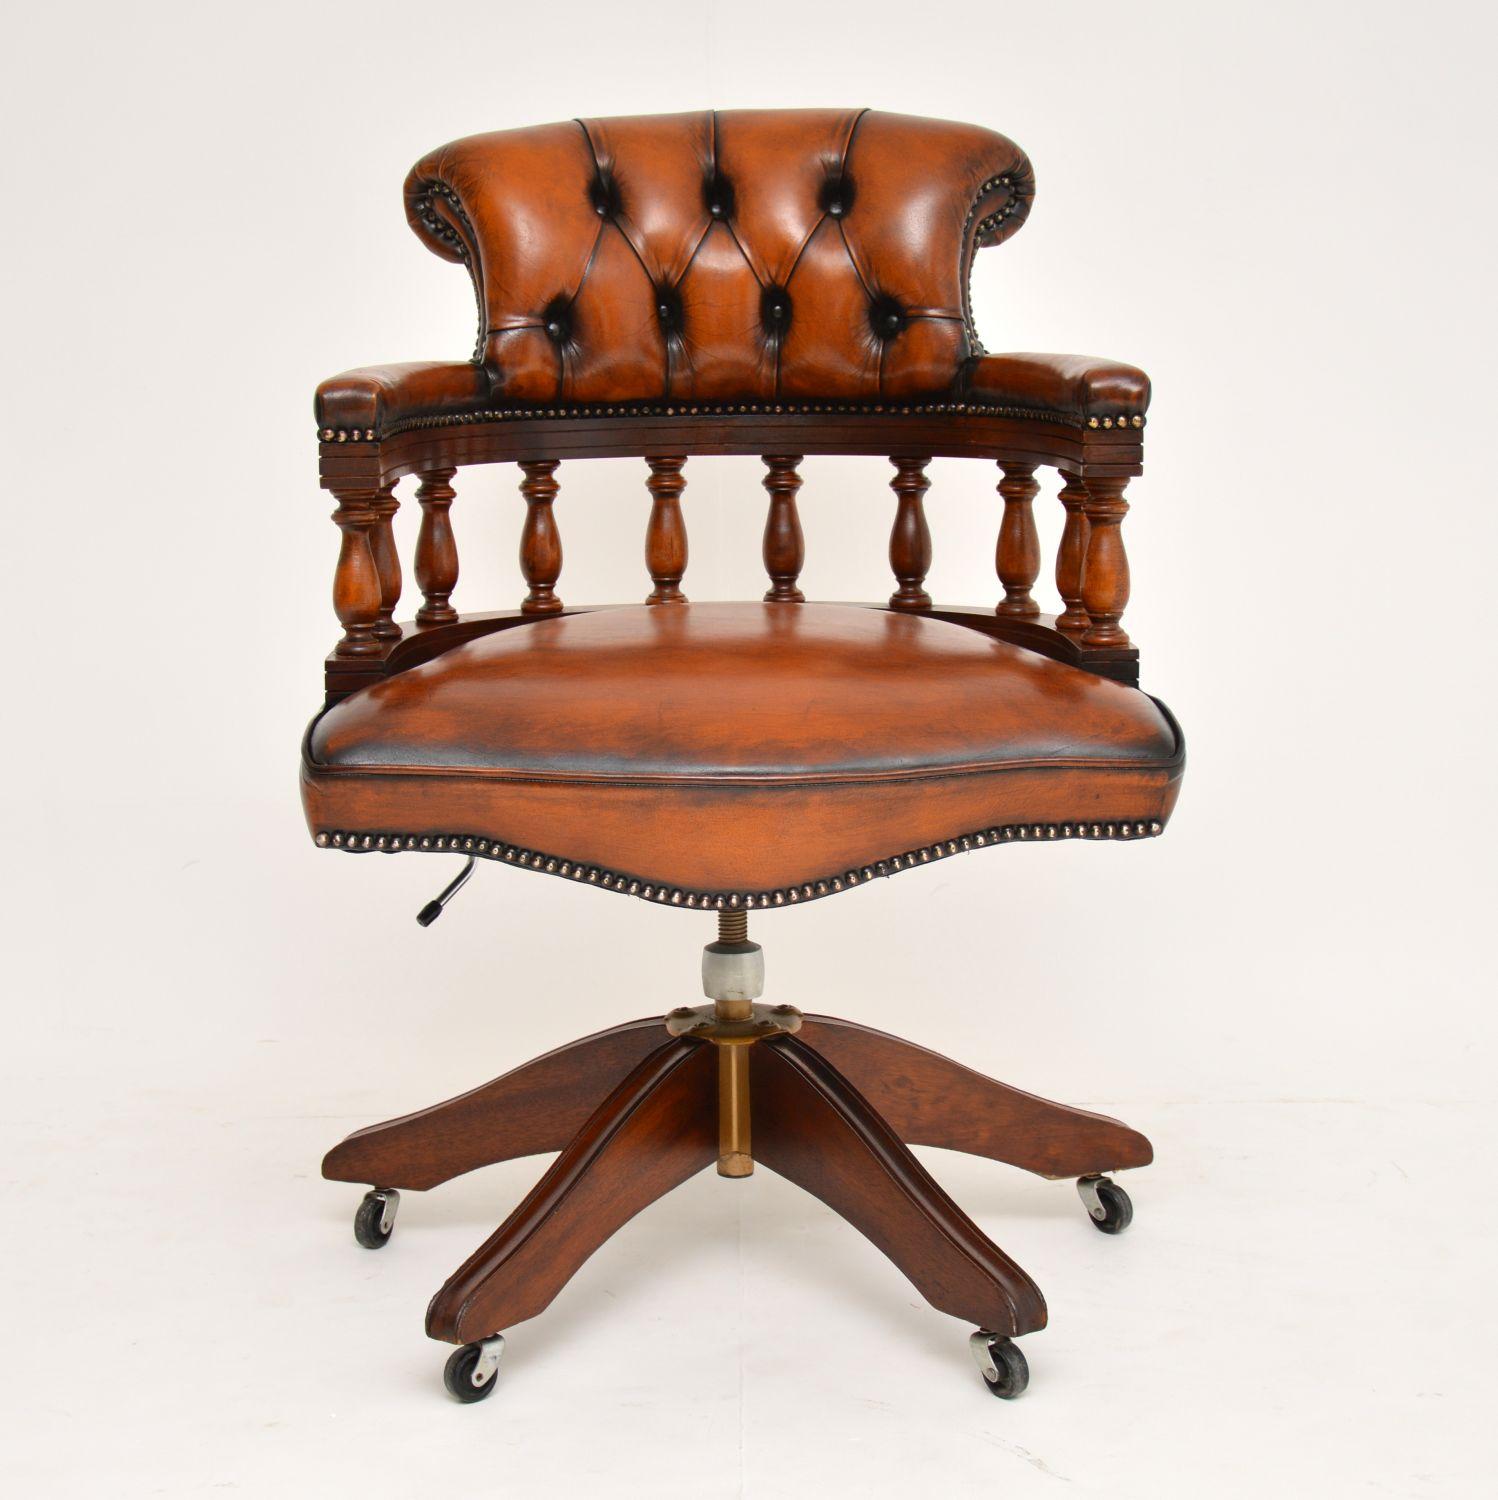 Antique Victorian style captains desk chair in mahogany & upholstered in leather, dating to circa 1950s period. This chair has a height adjustment, swivels & has a tilt mechanism which can have the tension adjusted. It’s in excellent condition & the